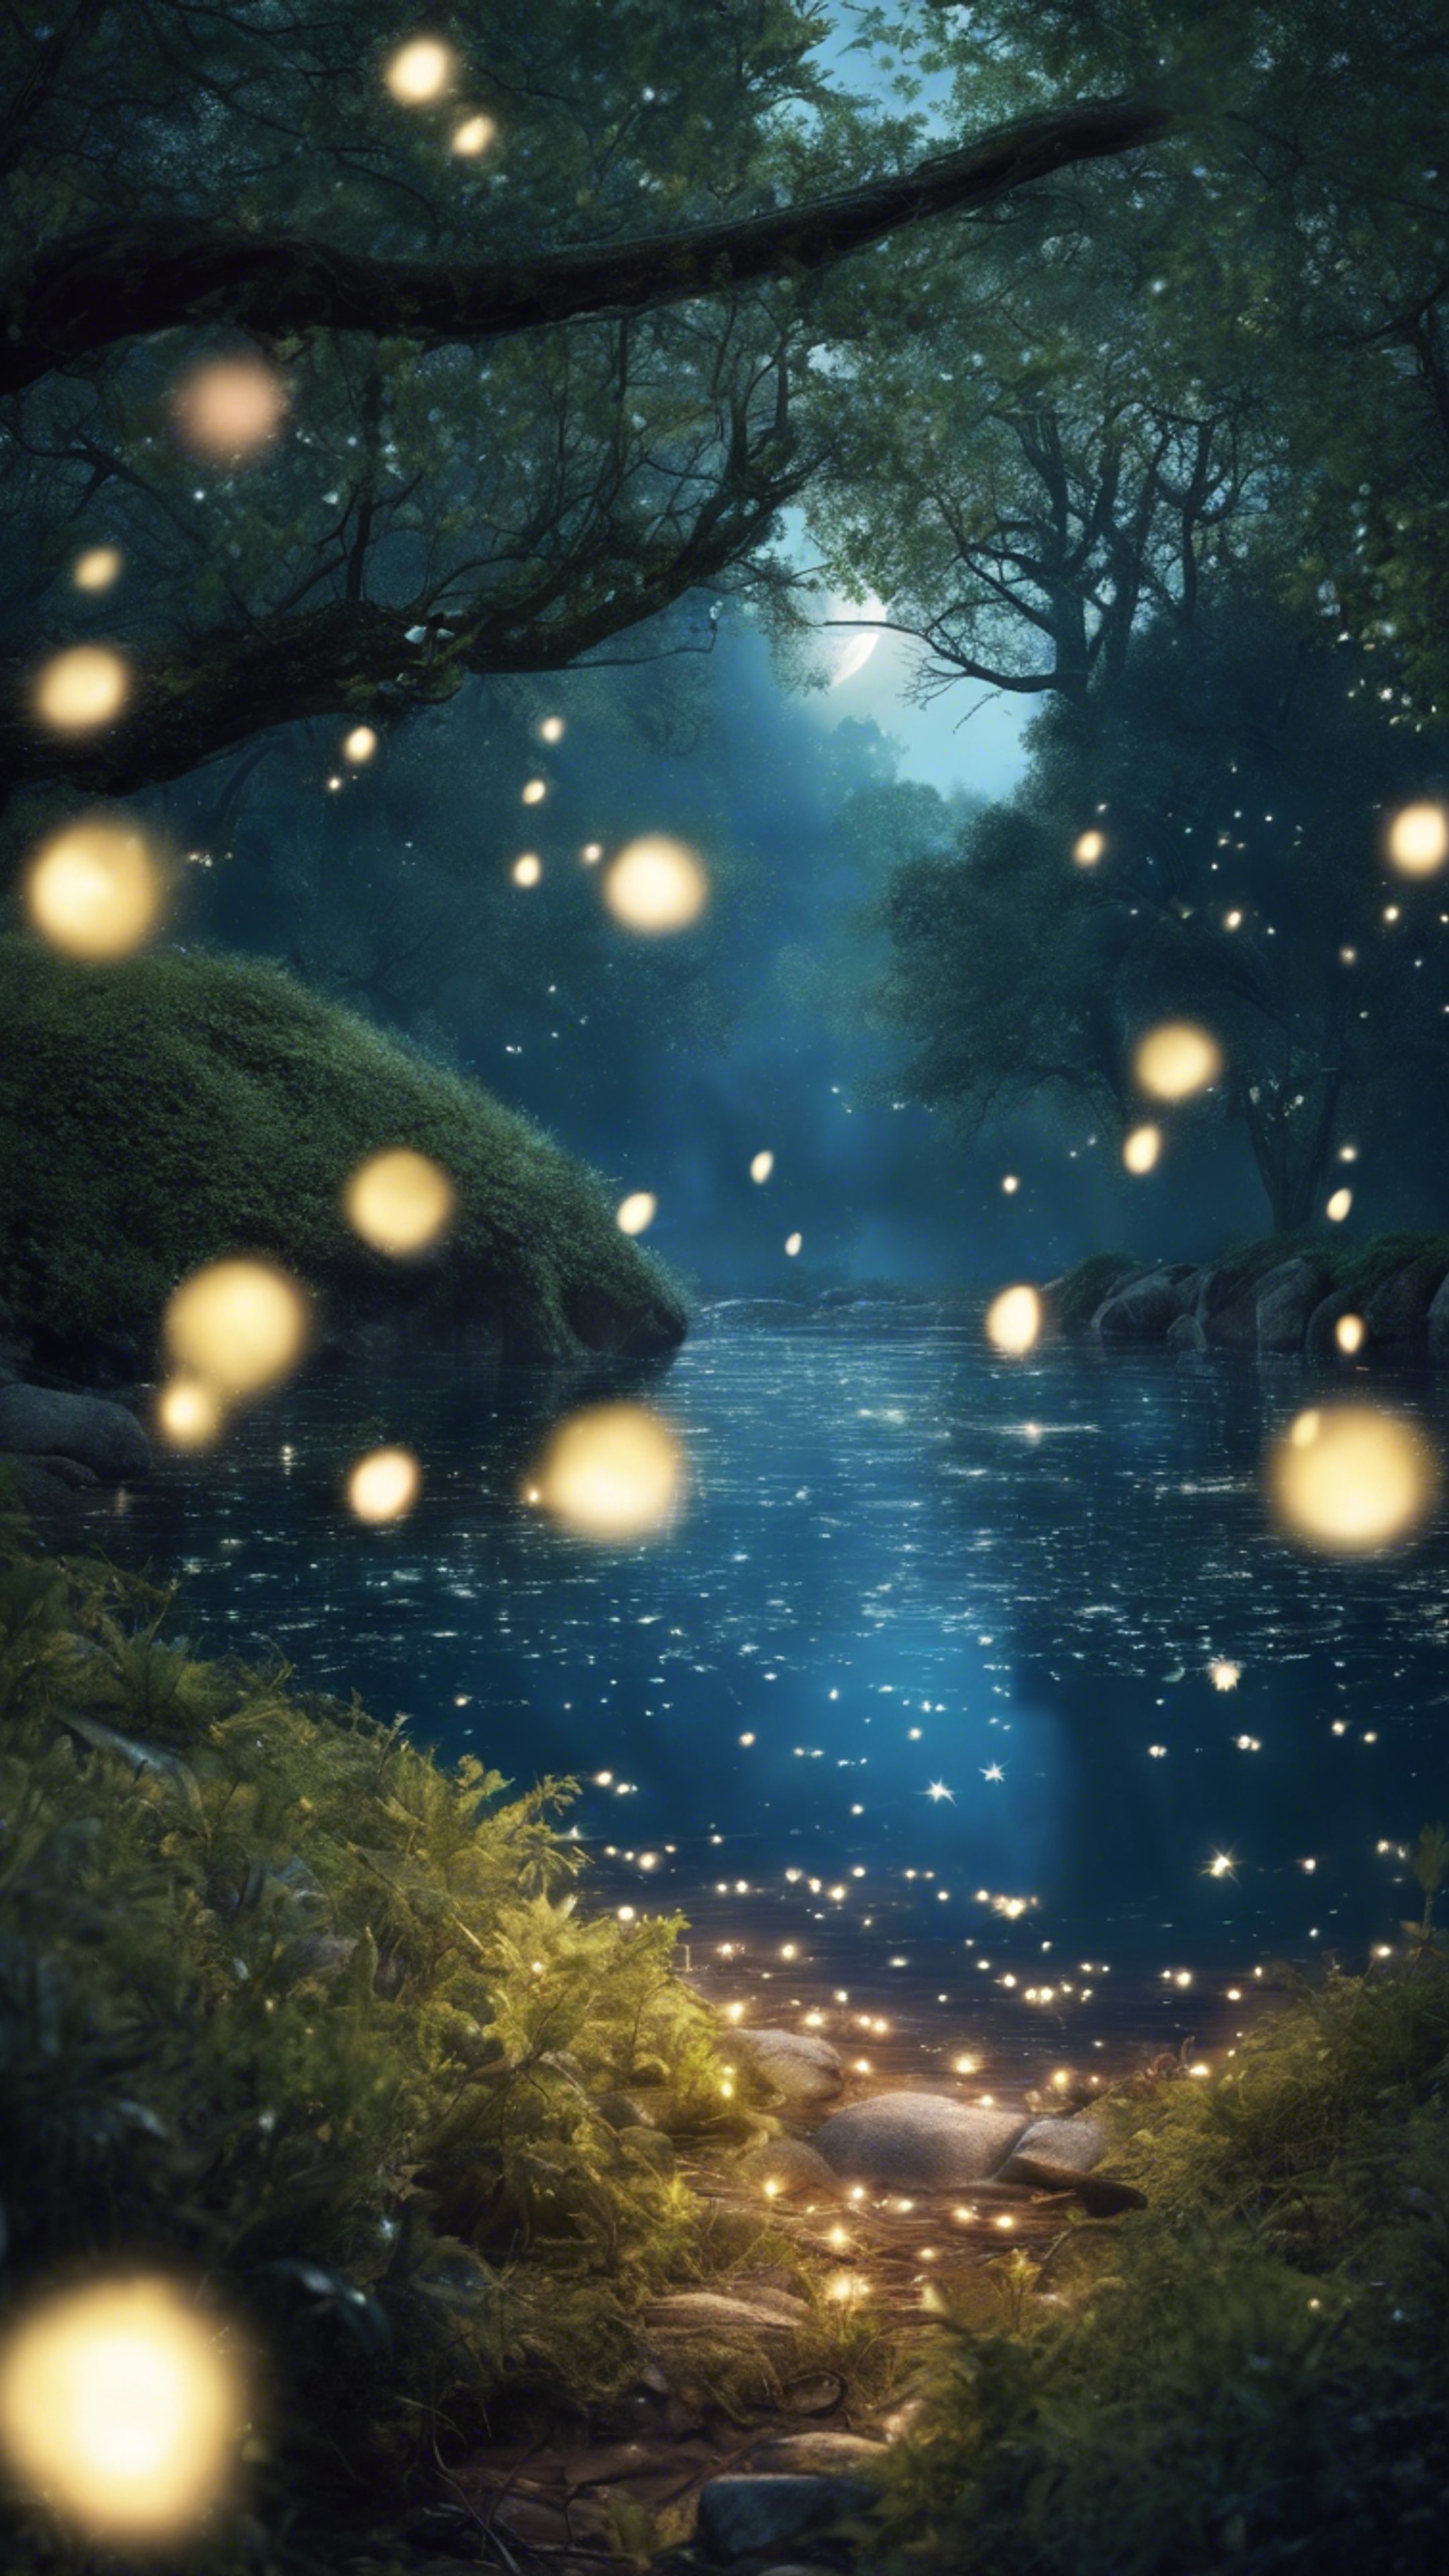 An enchanted forest lit up by midnight blue fireflies, with a river gleaming under the silver moon. Валлпапер[9c93675377644e8e8e21]